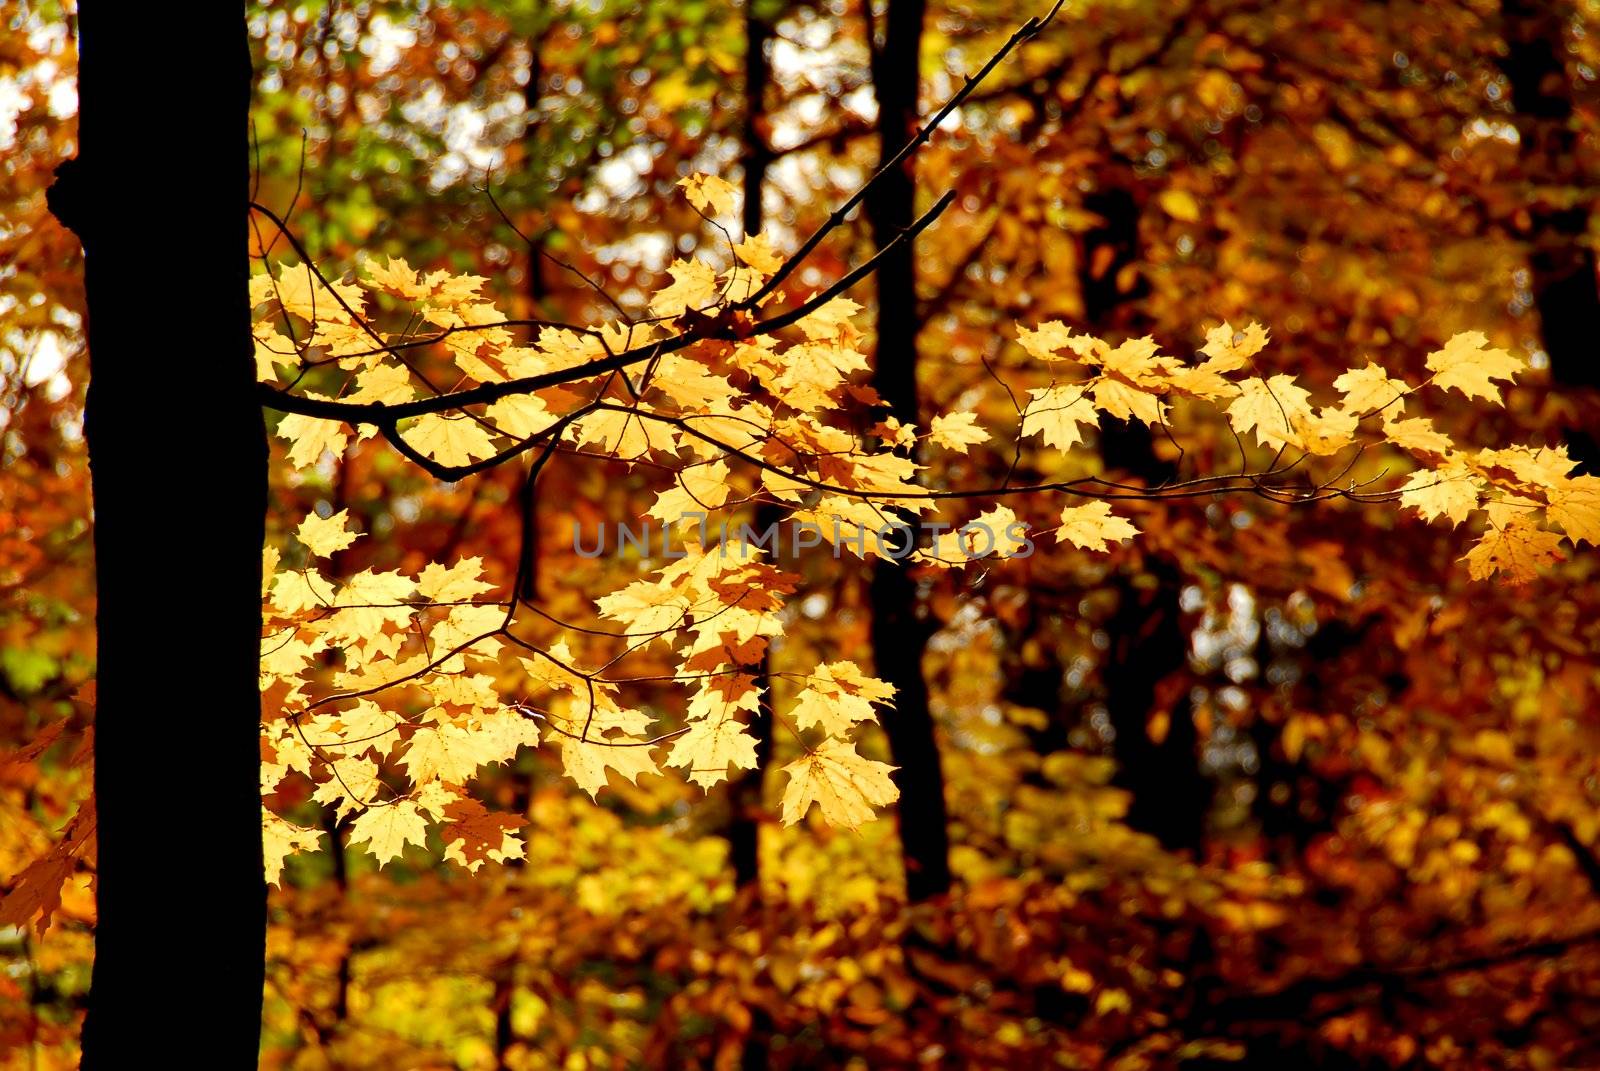 Maple branch with sunlit yellow leaves in autumn forest